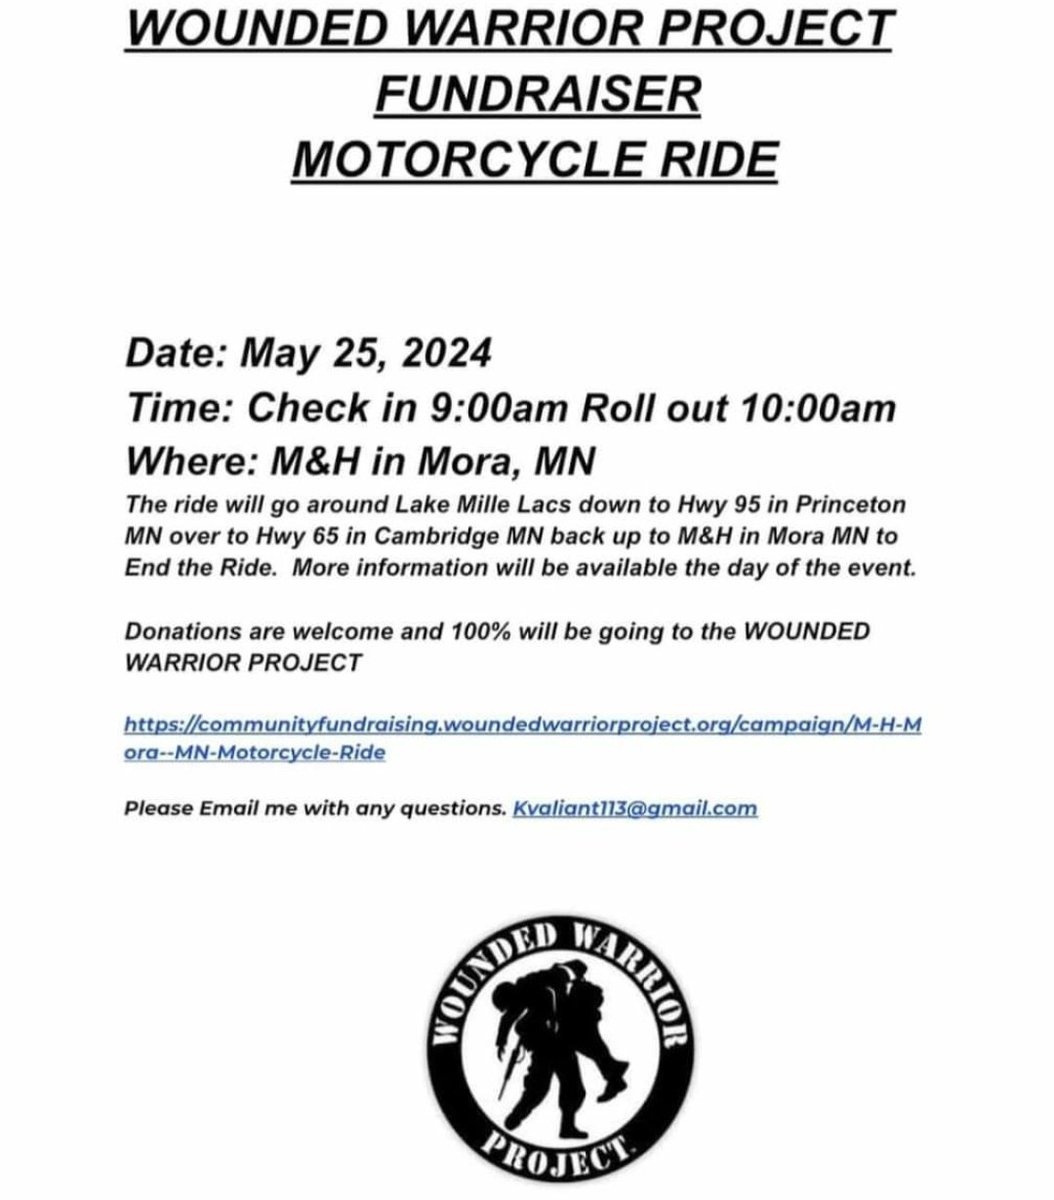 Wounded Warrior Fundraiser Motorcycle Ride May 25 starting at M&H in Mora, MN
#woundedwarriorproject #motorcycle #motorcycleride #biker #motorcyclist #Minnesota #moramn #veterans